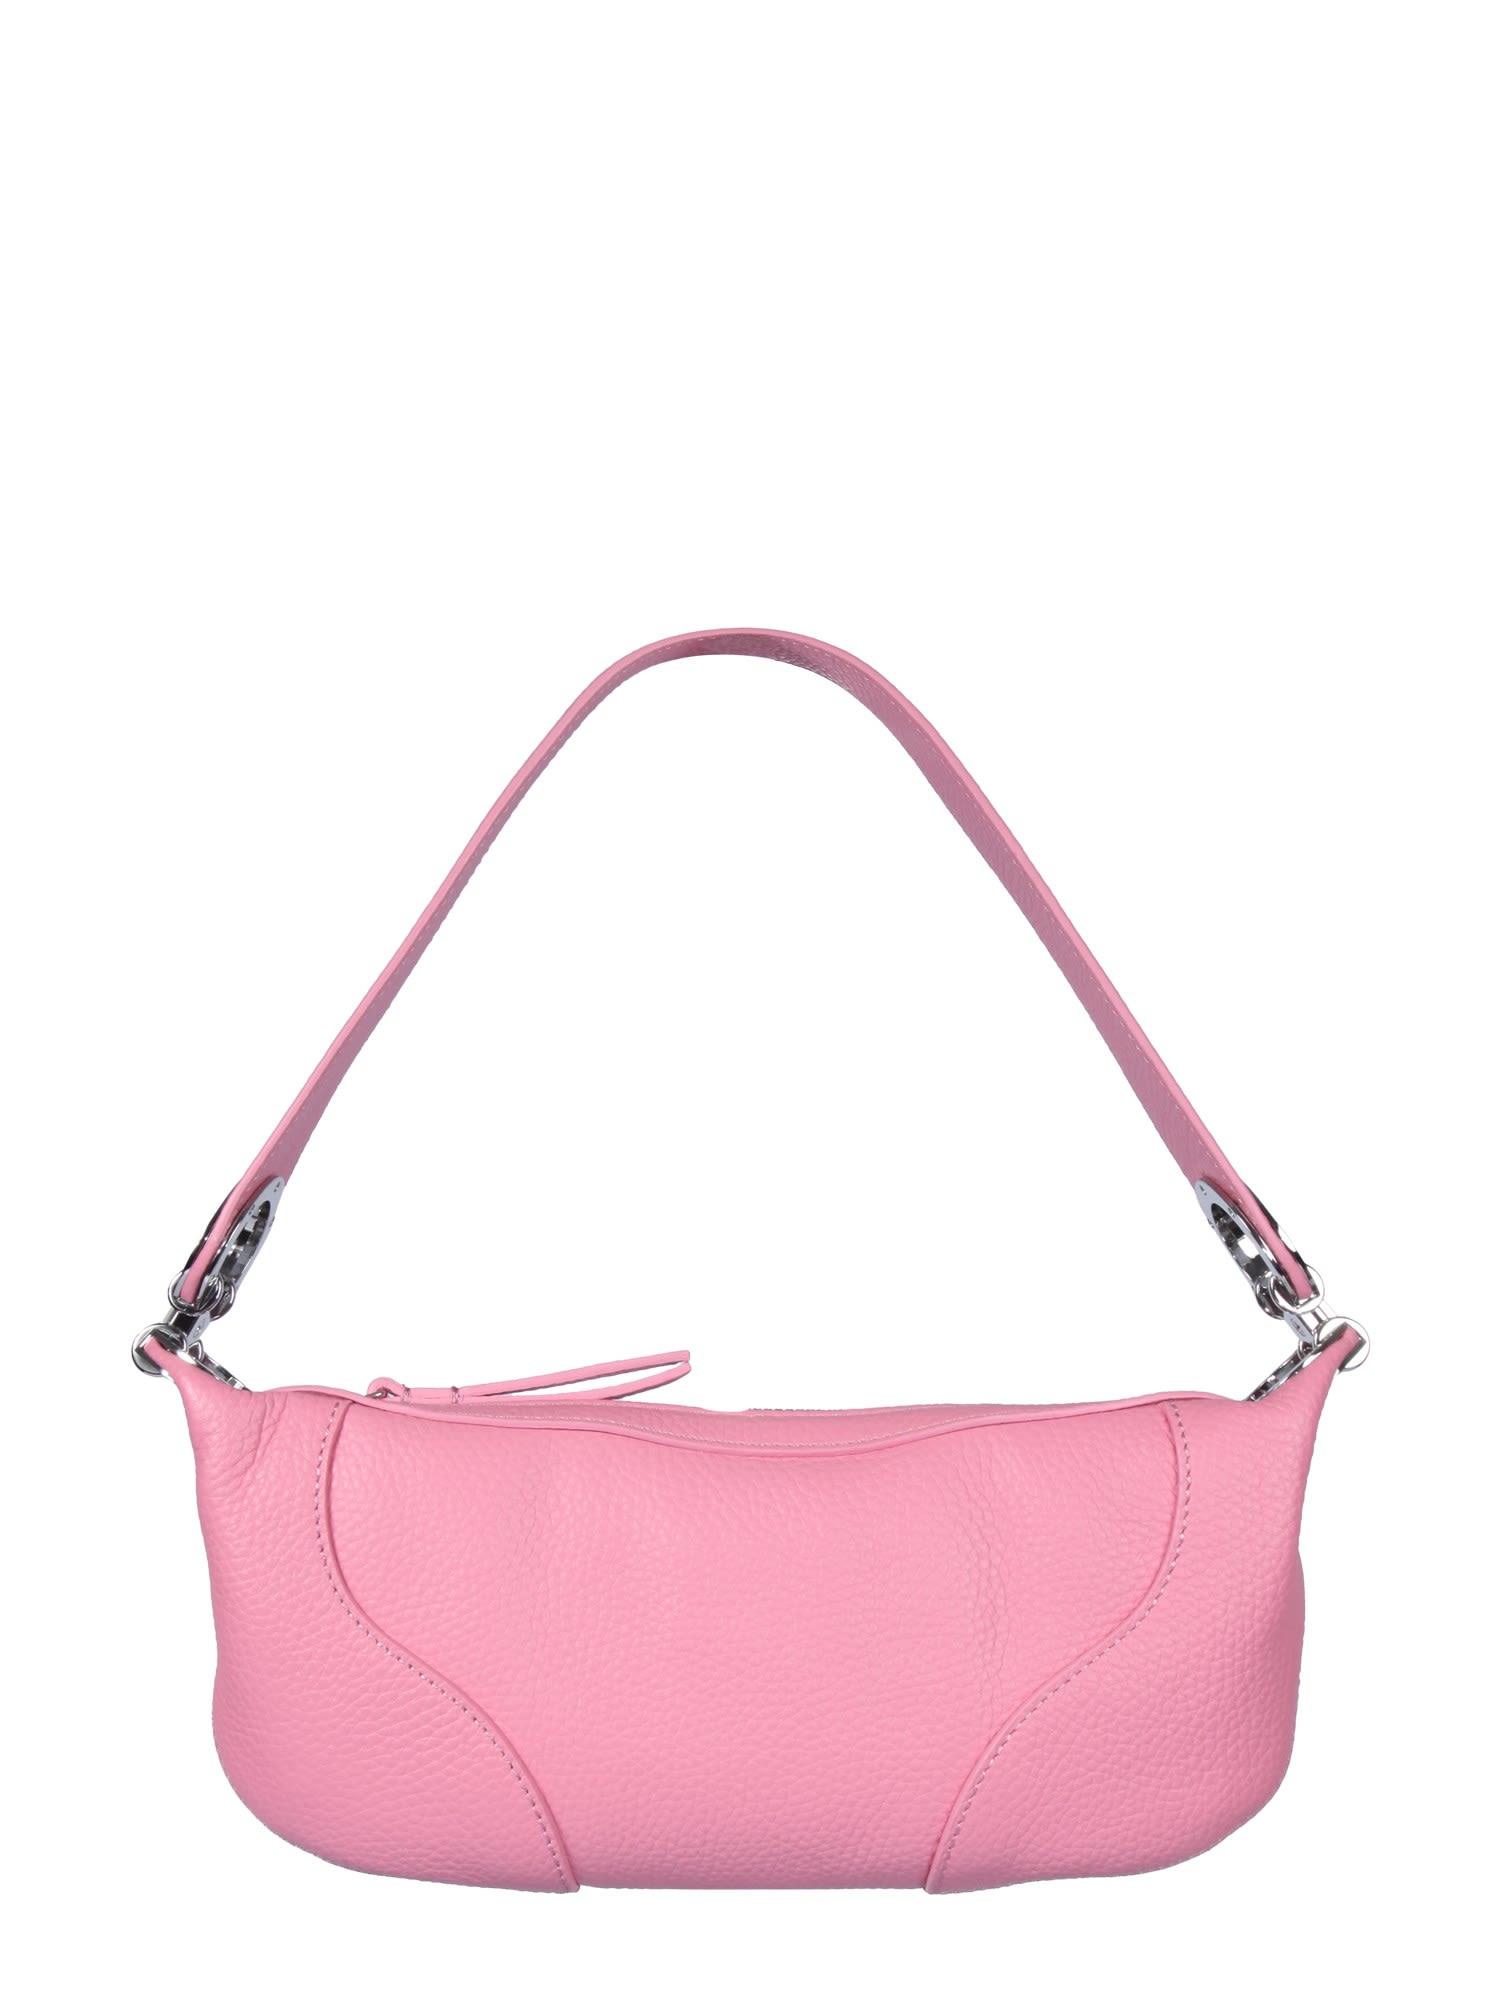 BY FAR Leather Mini Amira Bag in Pink - Save 1% | Lyst